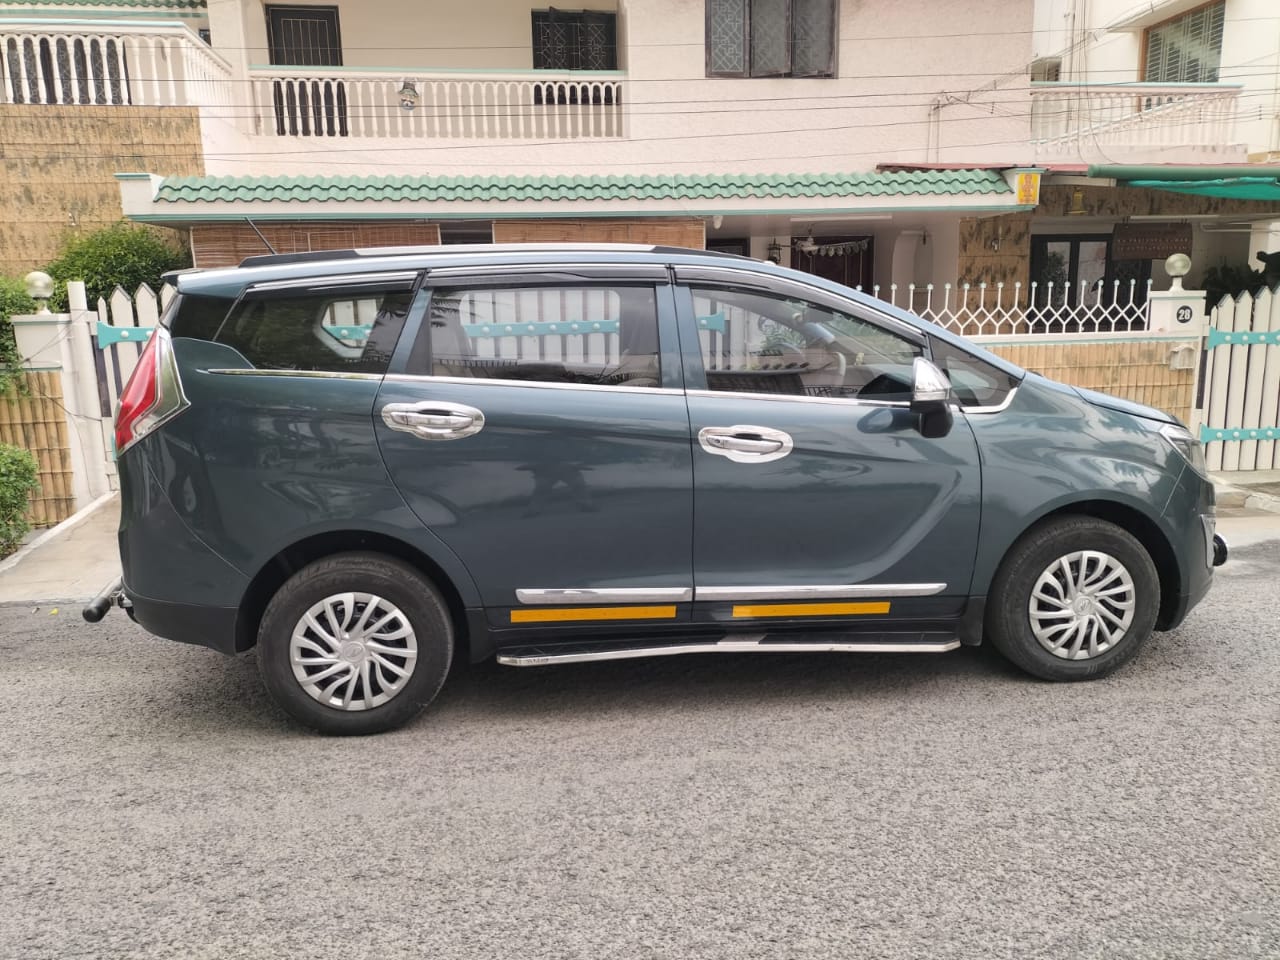 3855-for-sale-Mahindra-Marazzo-Diesel-Second-Owner-2019-TN-registered-rs-900000